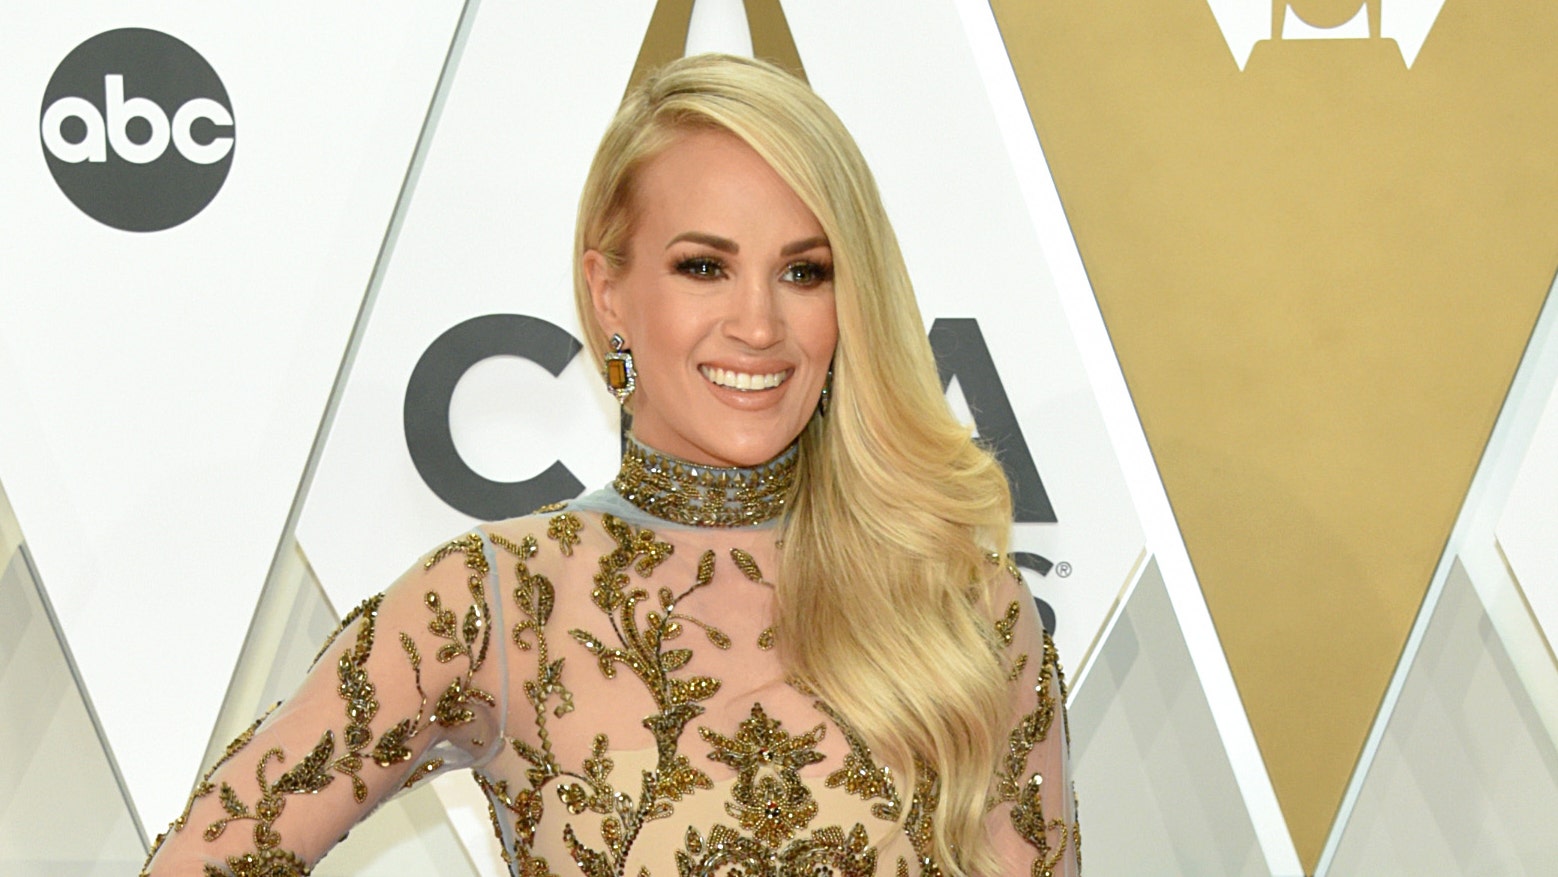 Carrie Underwood Flashes Legs In Two Short Dresses At The Grammys